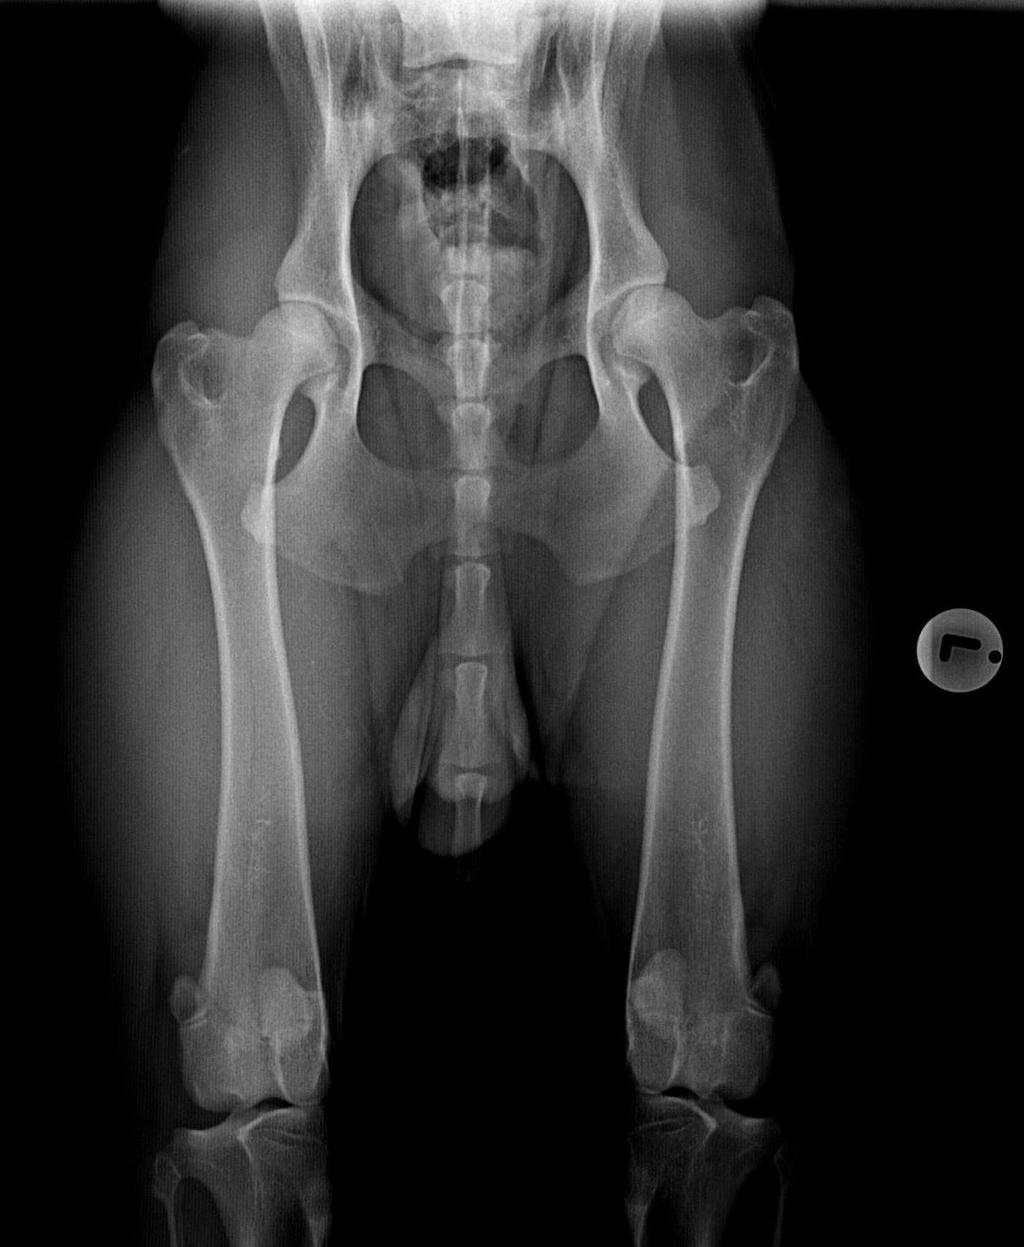 occurs) due to inadequate seating of the femoral head in the acetabulum and the stresses related to such abnormal seating.